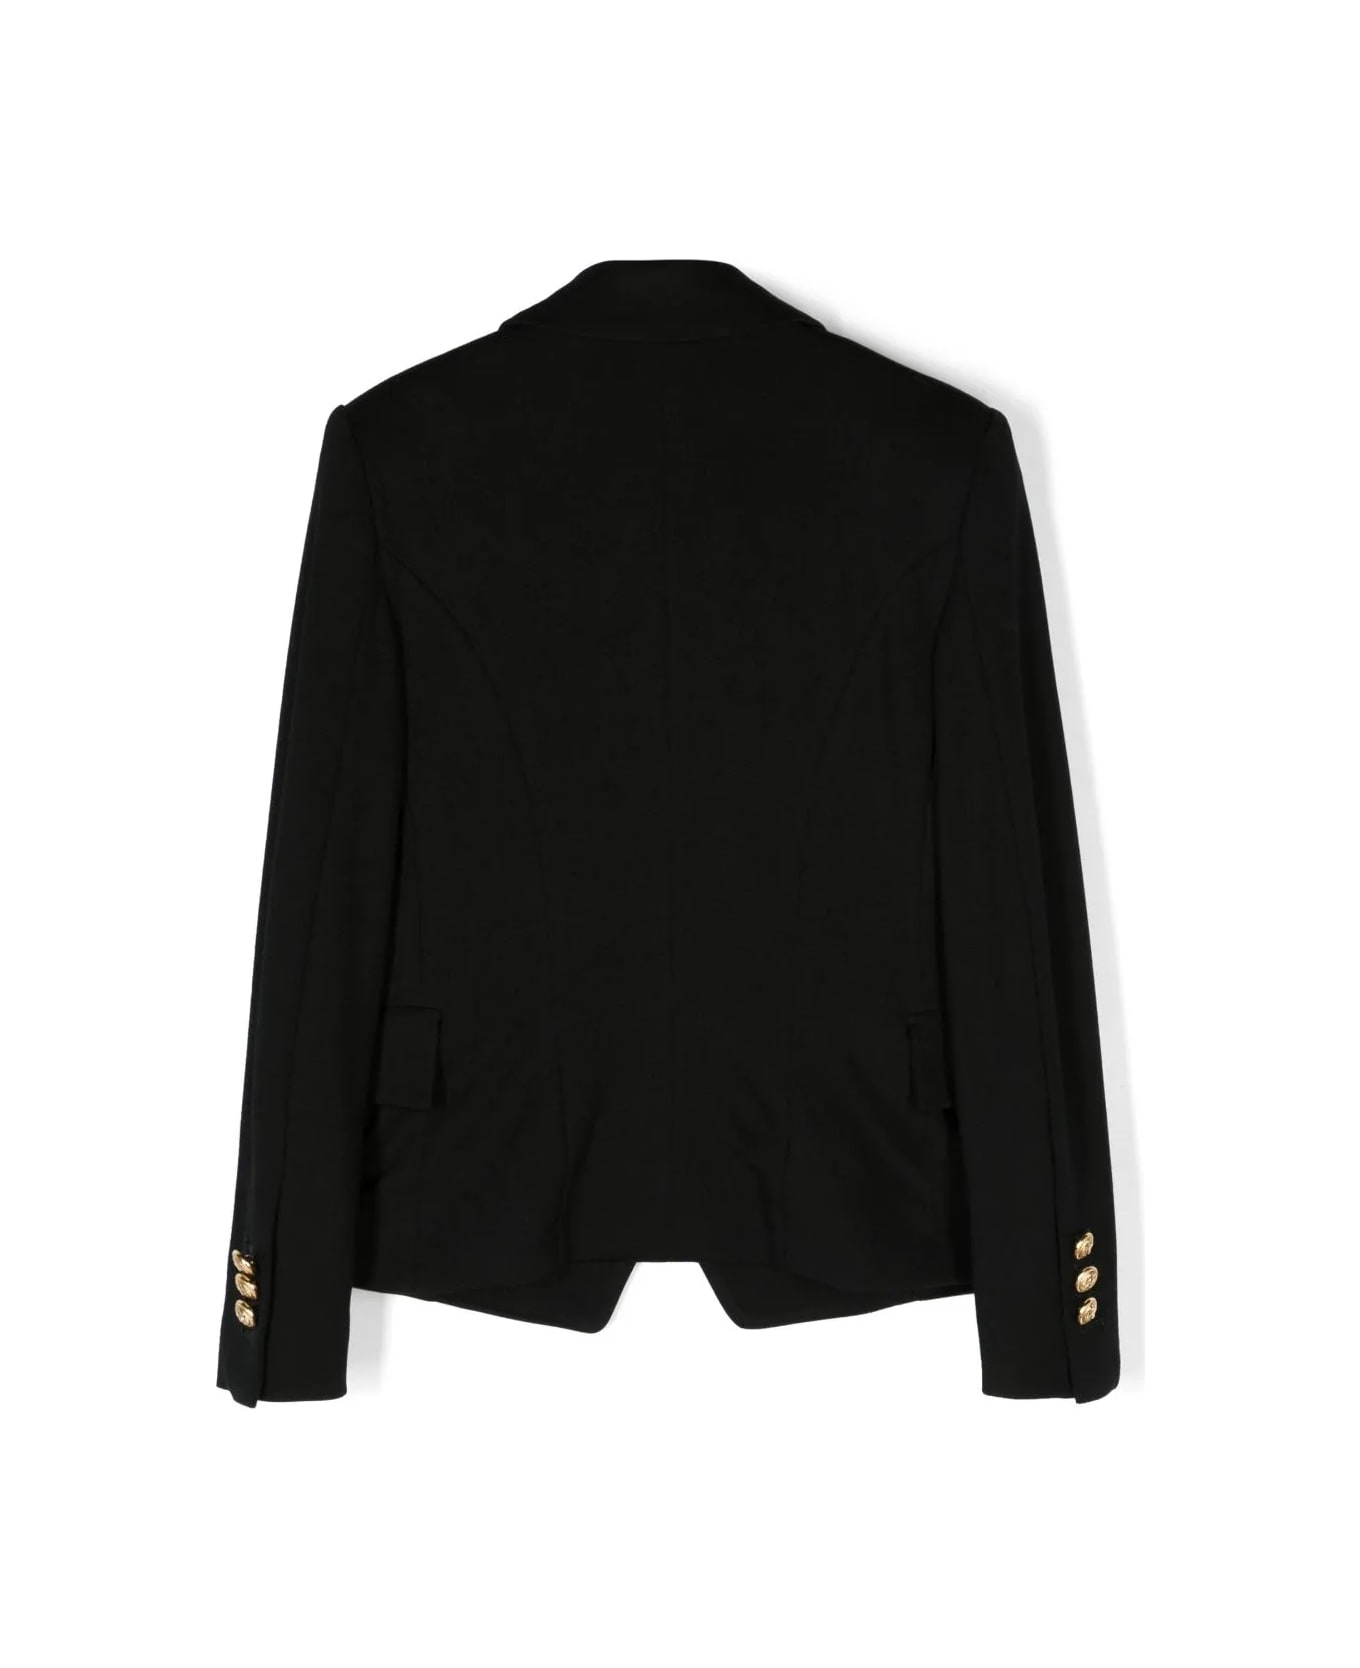 Balmain Double-breasted Blazer With Embossed Buttons - Black